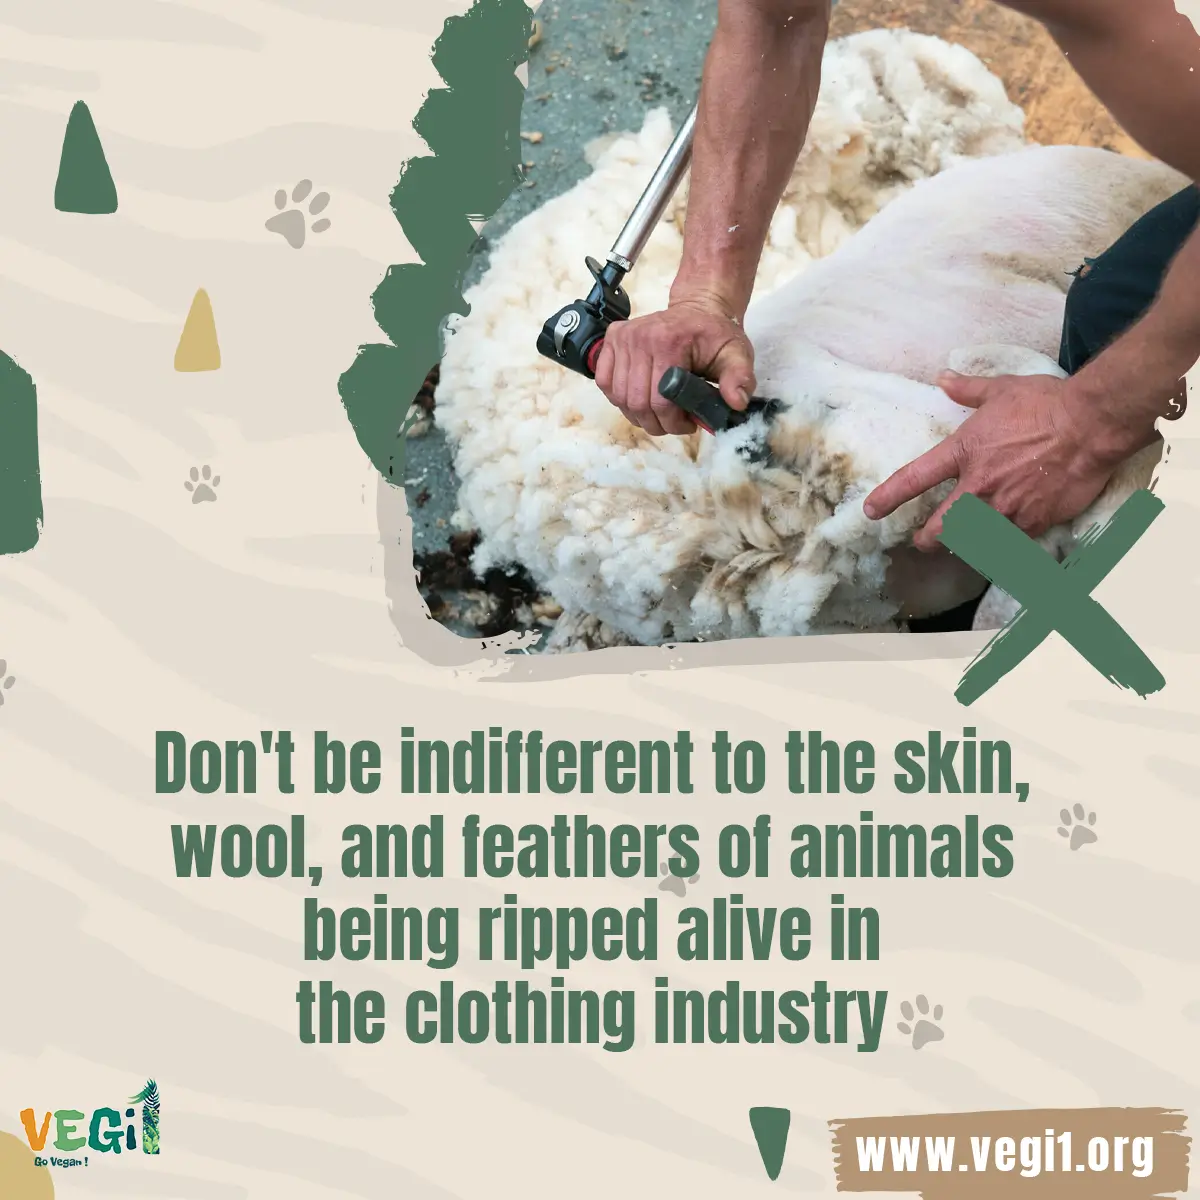 Don't be indifferent to the skin, wool, and feathers of animals being ripped alive in the clothing industry